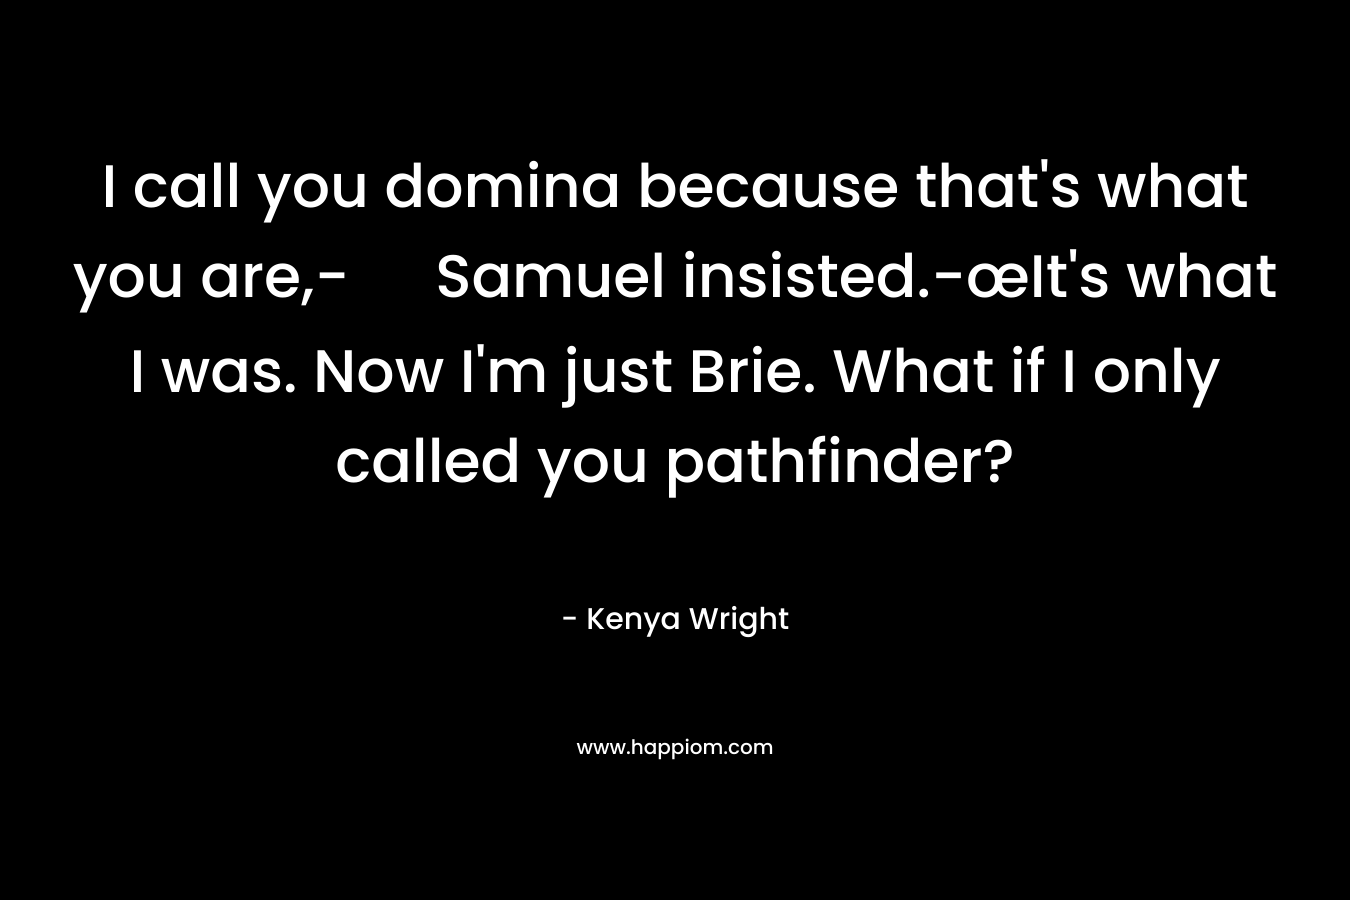 I call you domina because that’s what you are,- Samuel insisted.-œIt’s what I was. Now I’m just Brie. What if I only called you pathfinder? – Kenya Wright